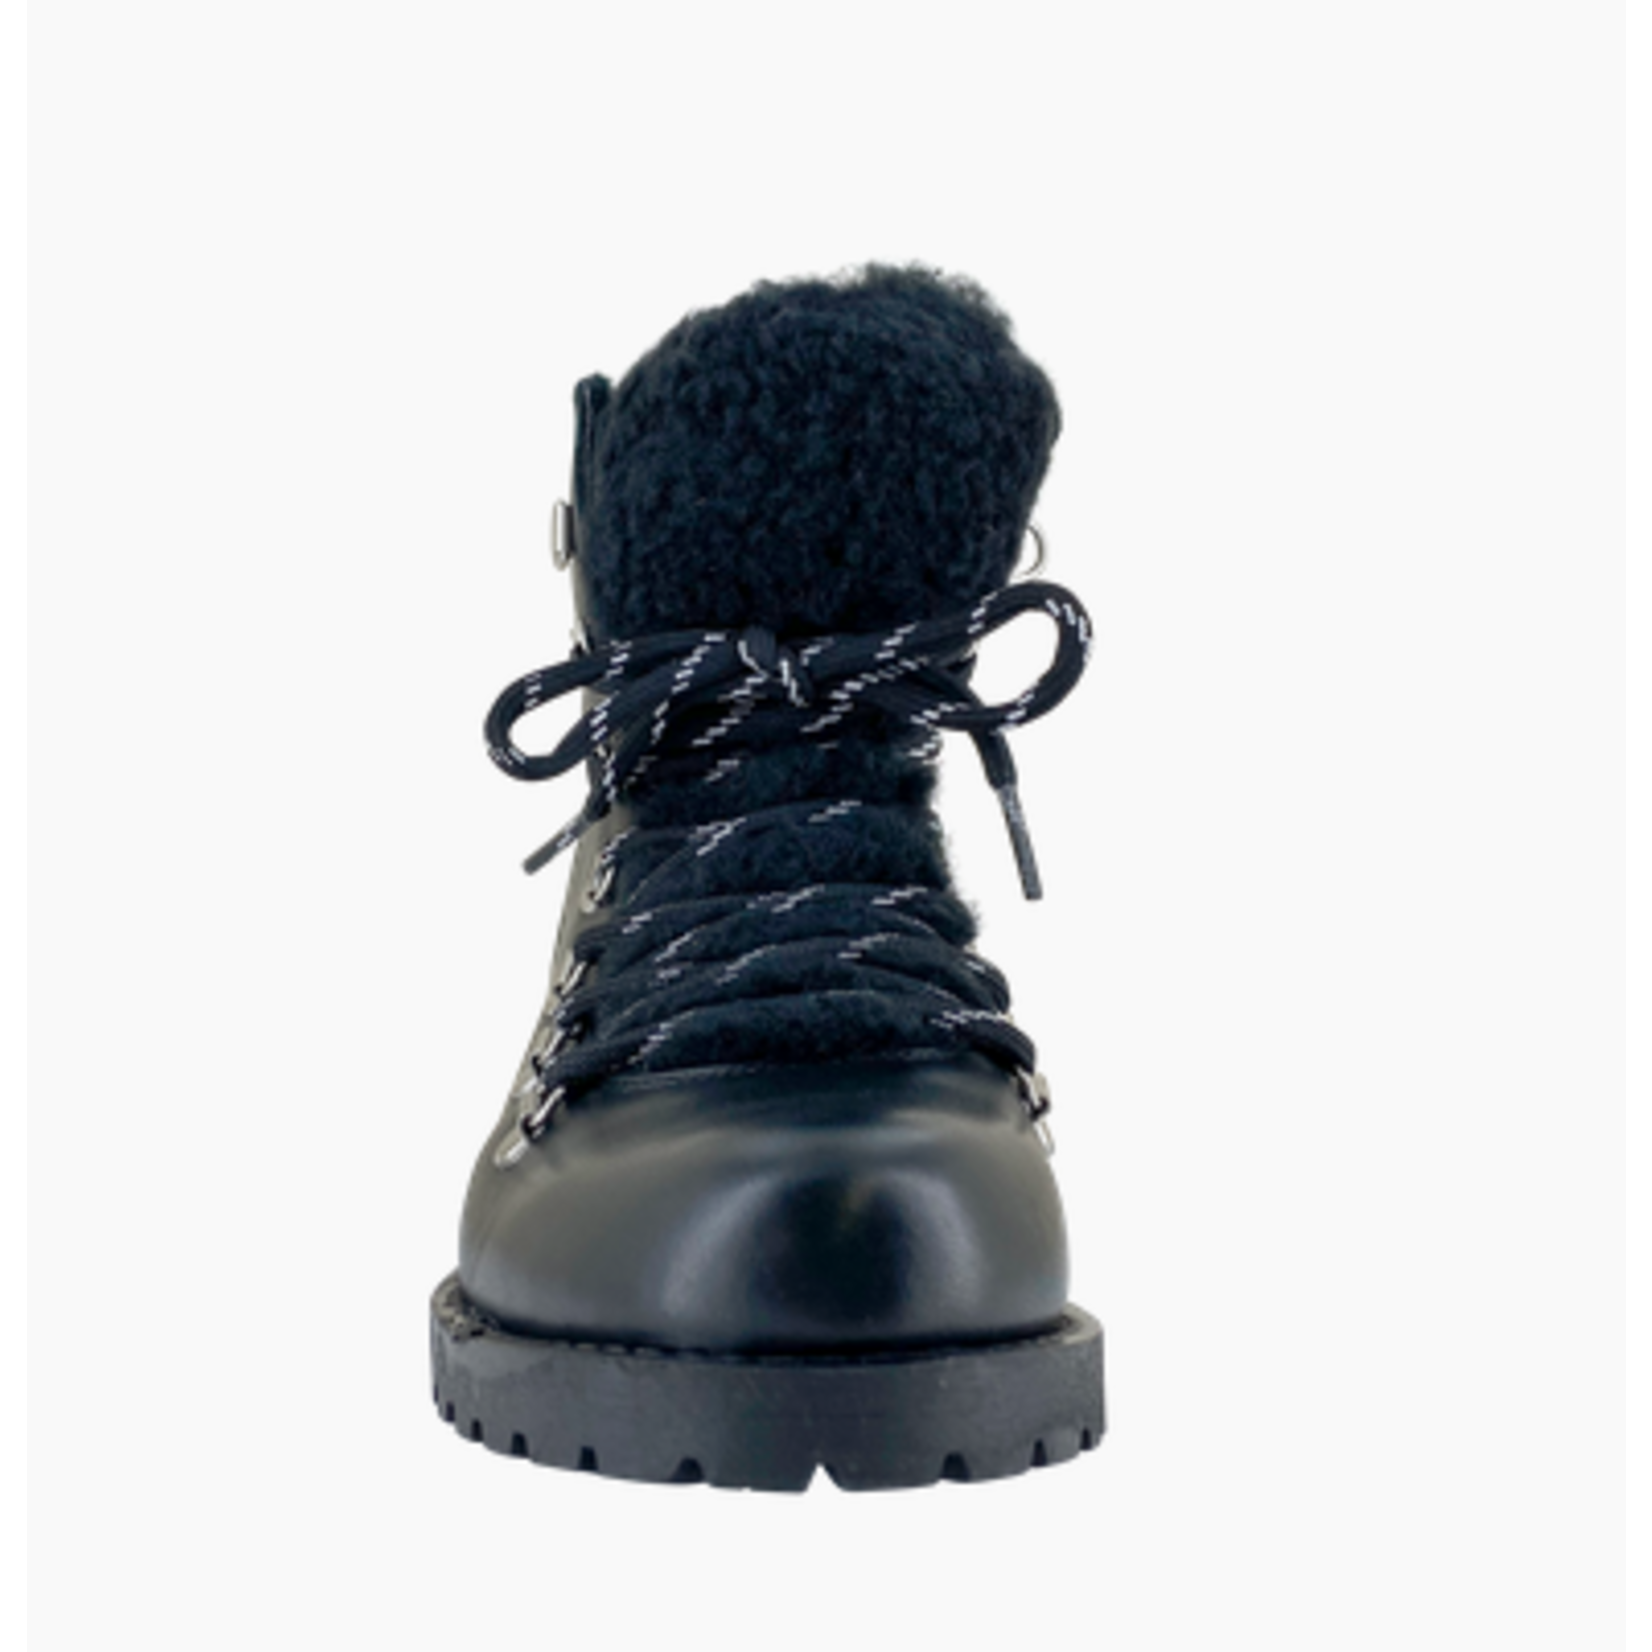 Eric Michaels Franki Black Leather Boot By Eric Michaels